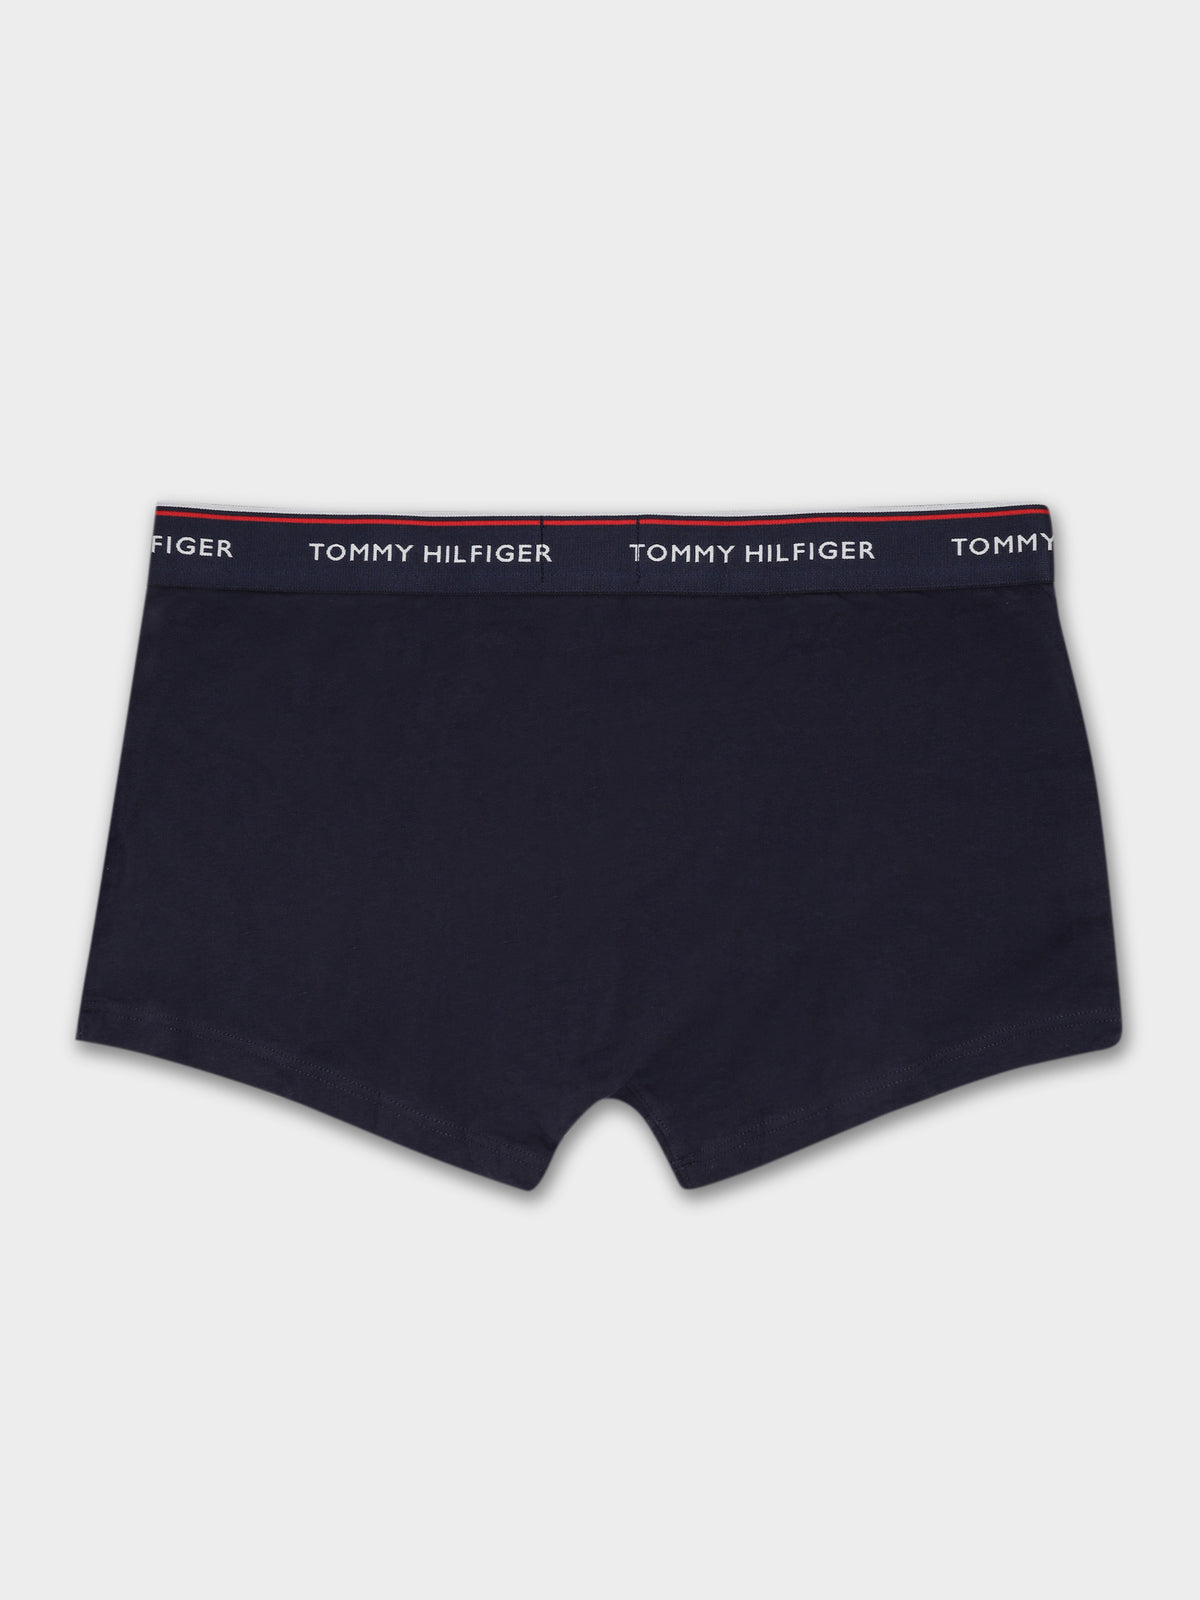 3 Pairs of Low Rise Boxer Briefs in Navy